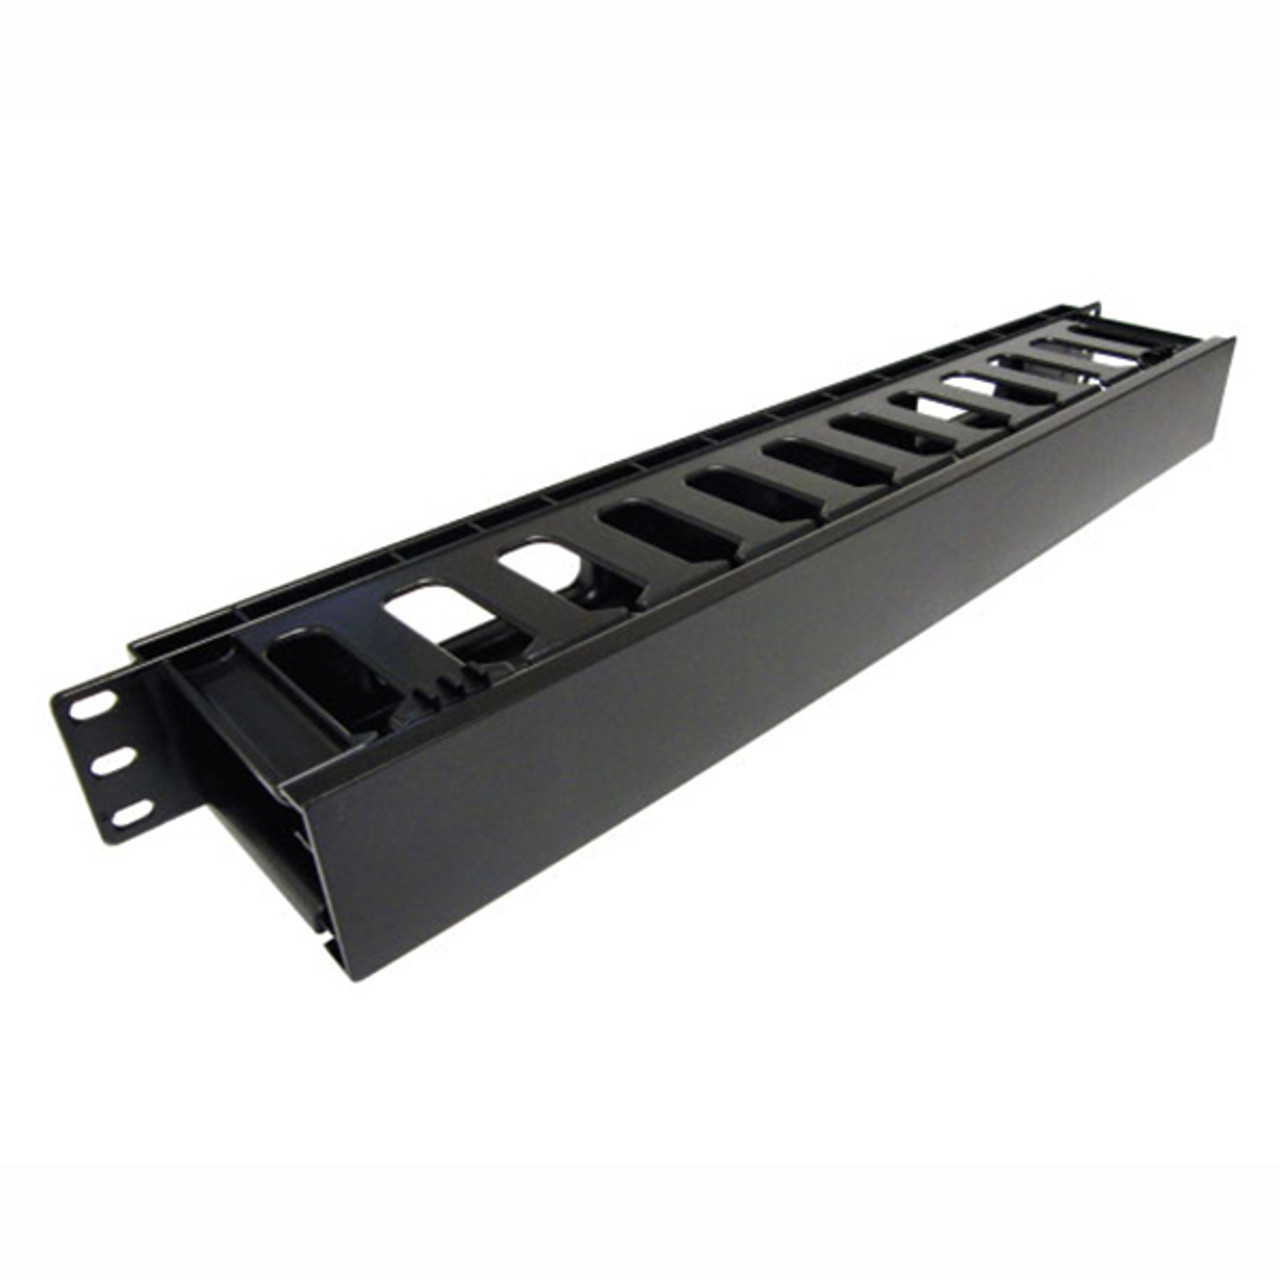 Horizontal Cable Manager 1U 19 EIA w/ Cover Black Plastic, Single Side,  comparable to WMPFSE